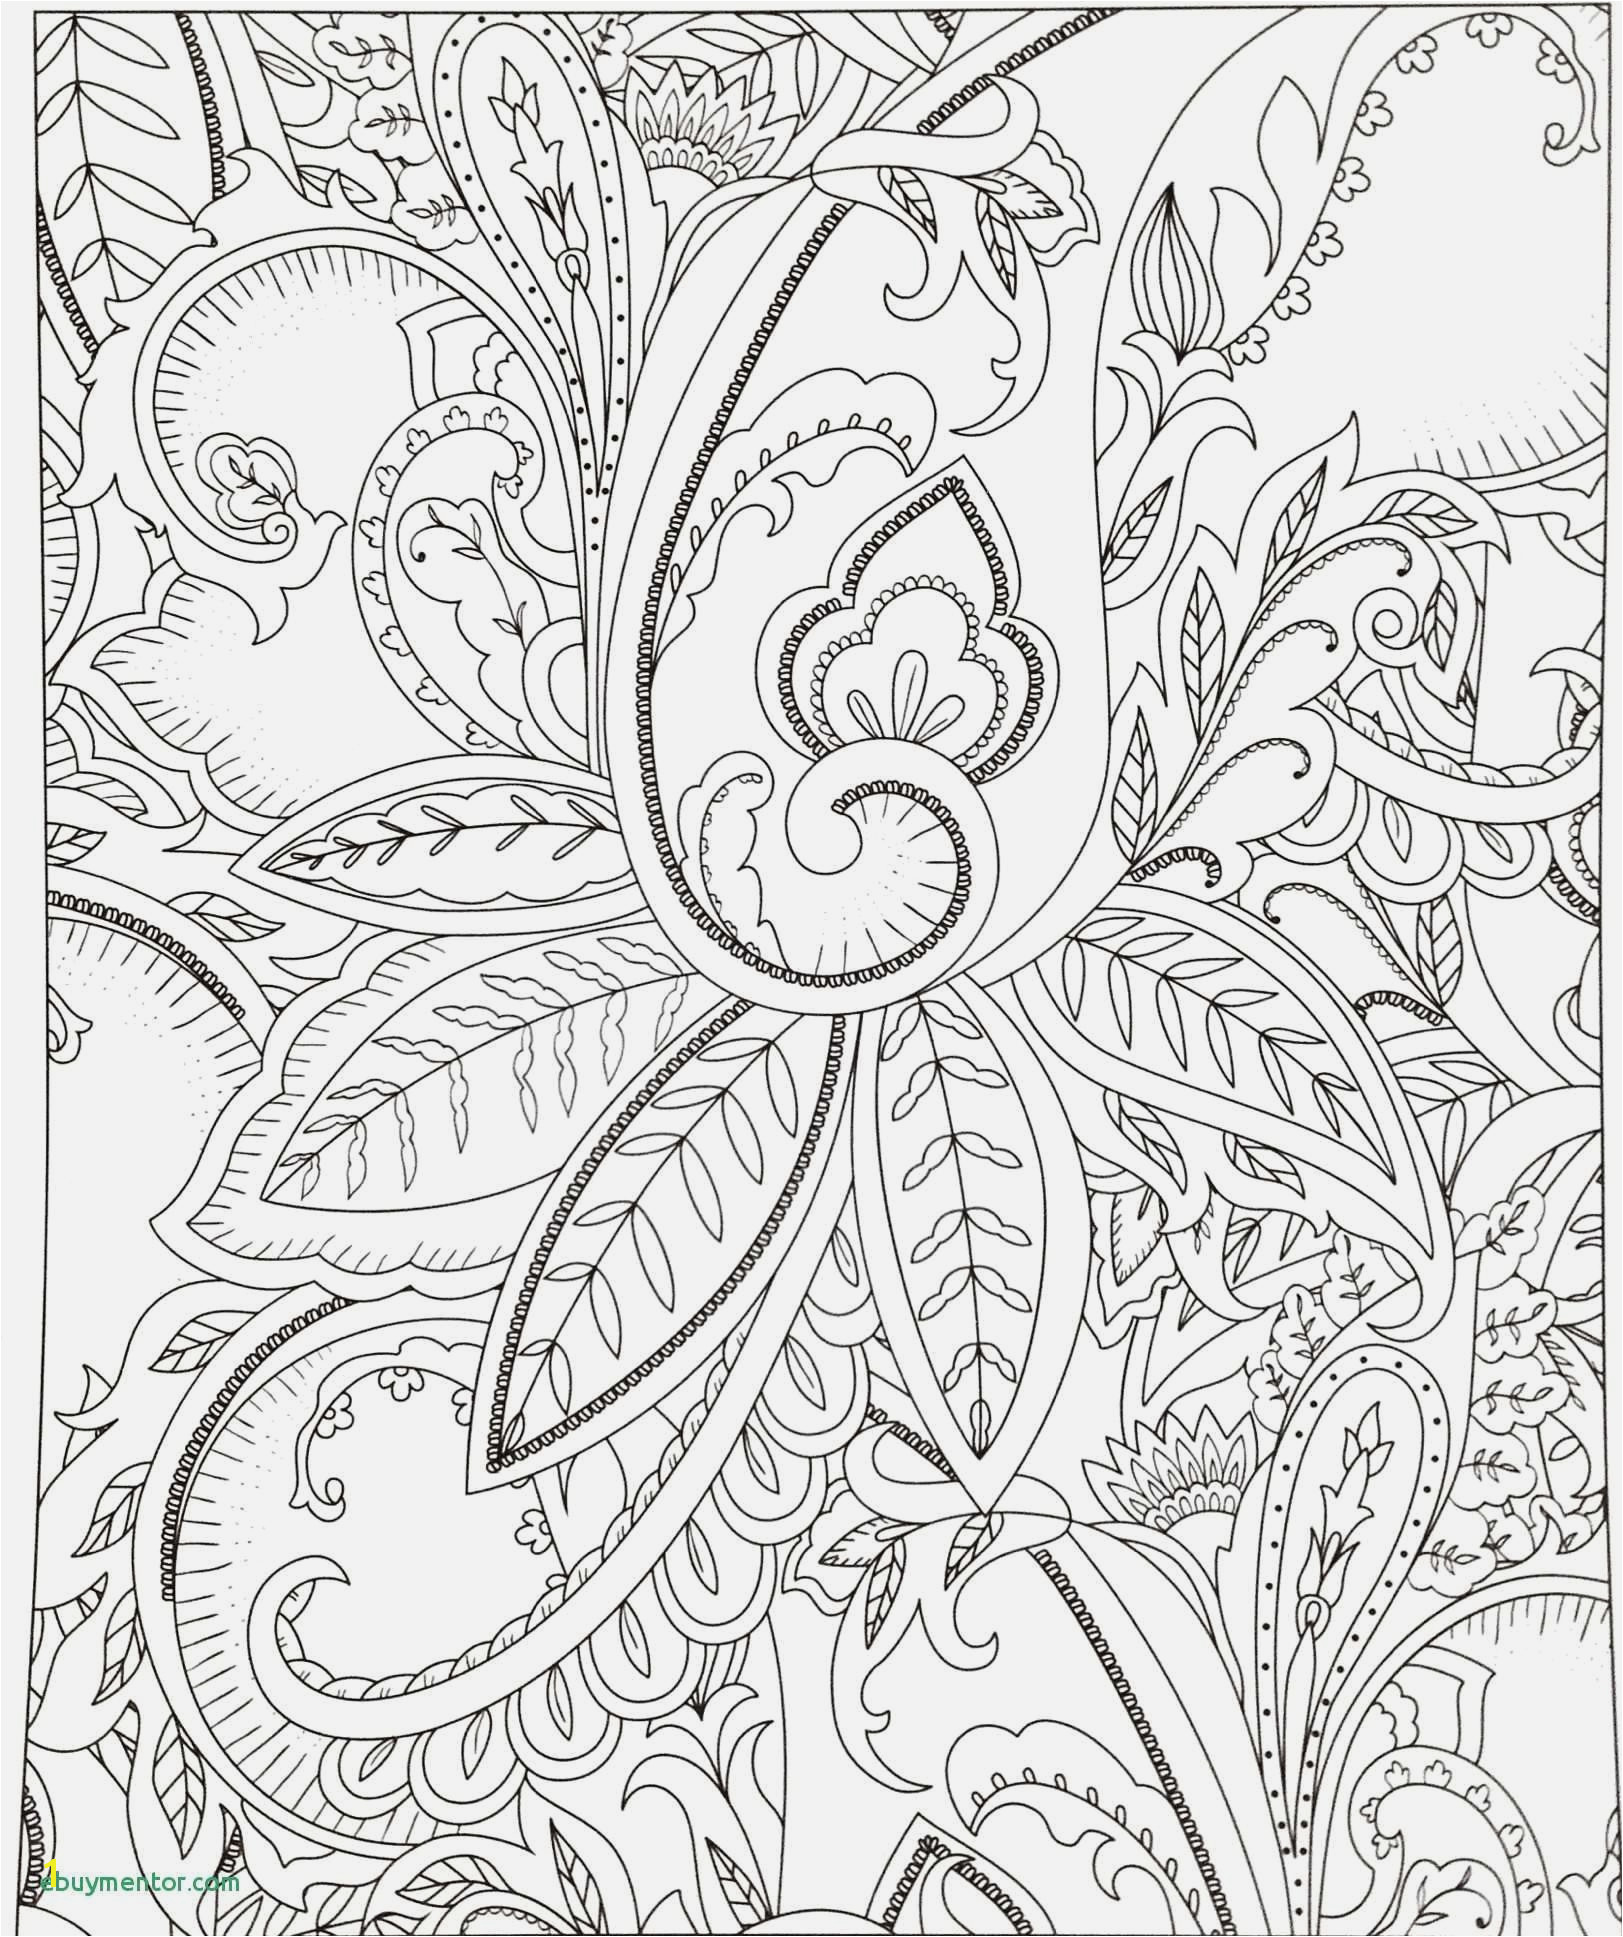 Cool Coloring Pages for Teenagers to Print Pferde Ausmalbilder Beispielbilder Färben Christmas Coloring Pages